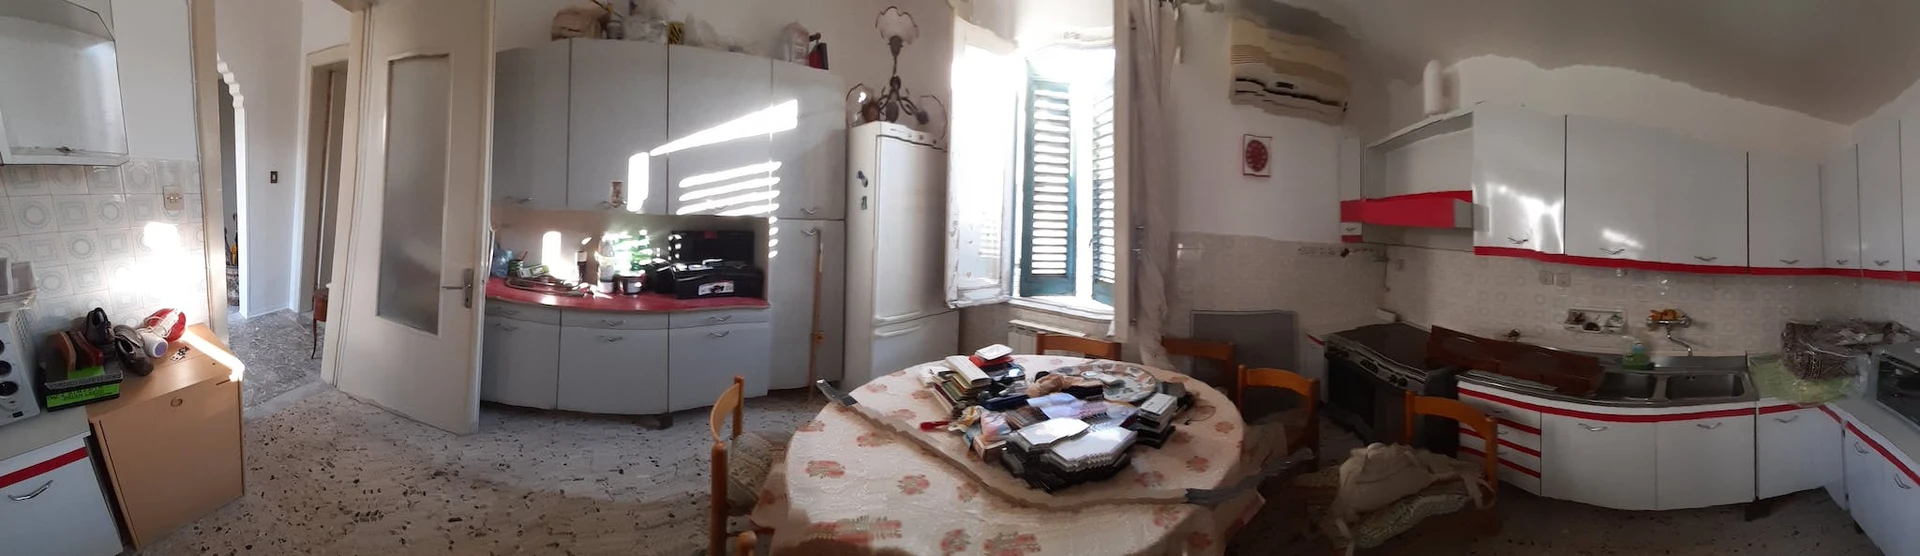 Room for rent in a shared flat in Messina